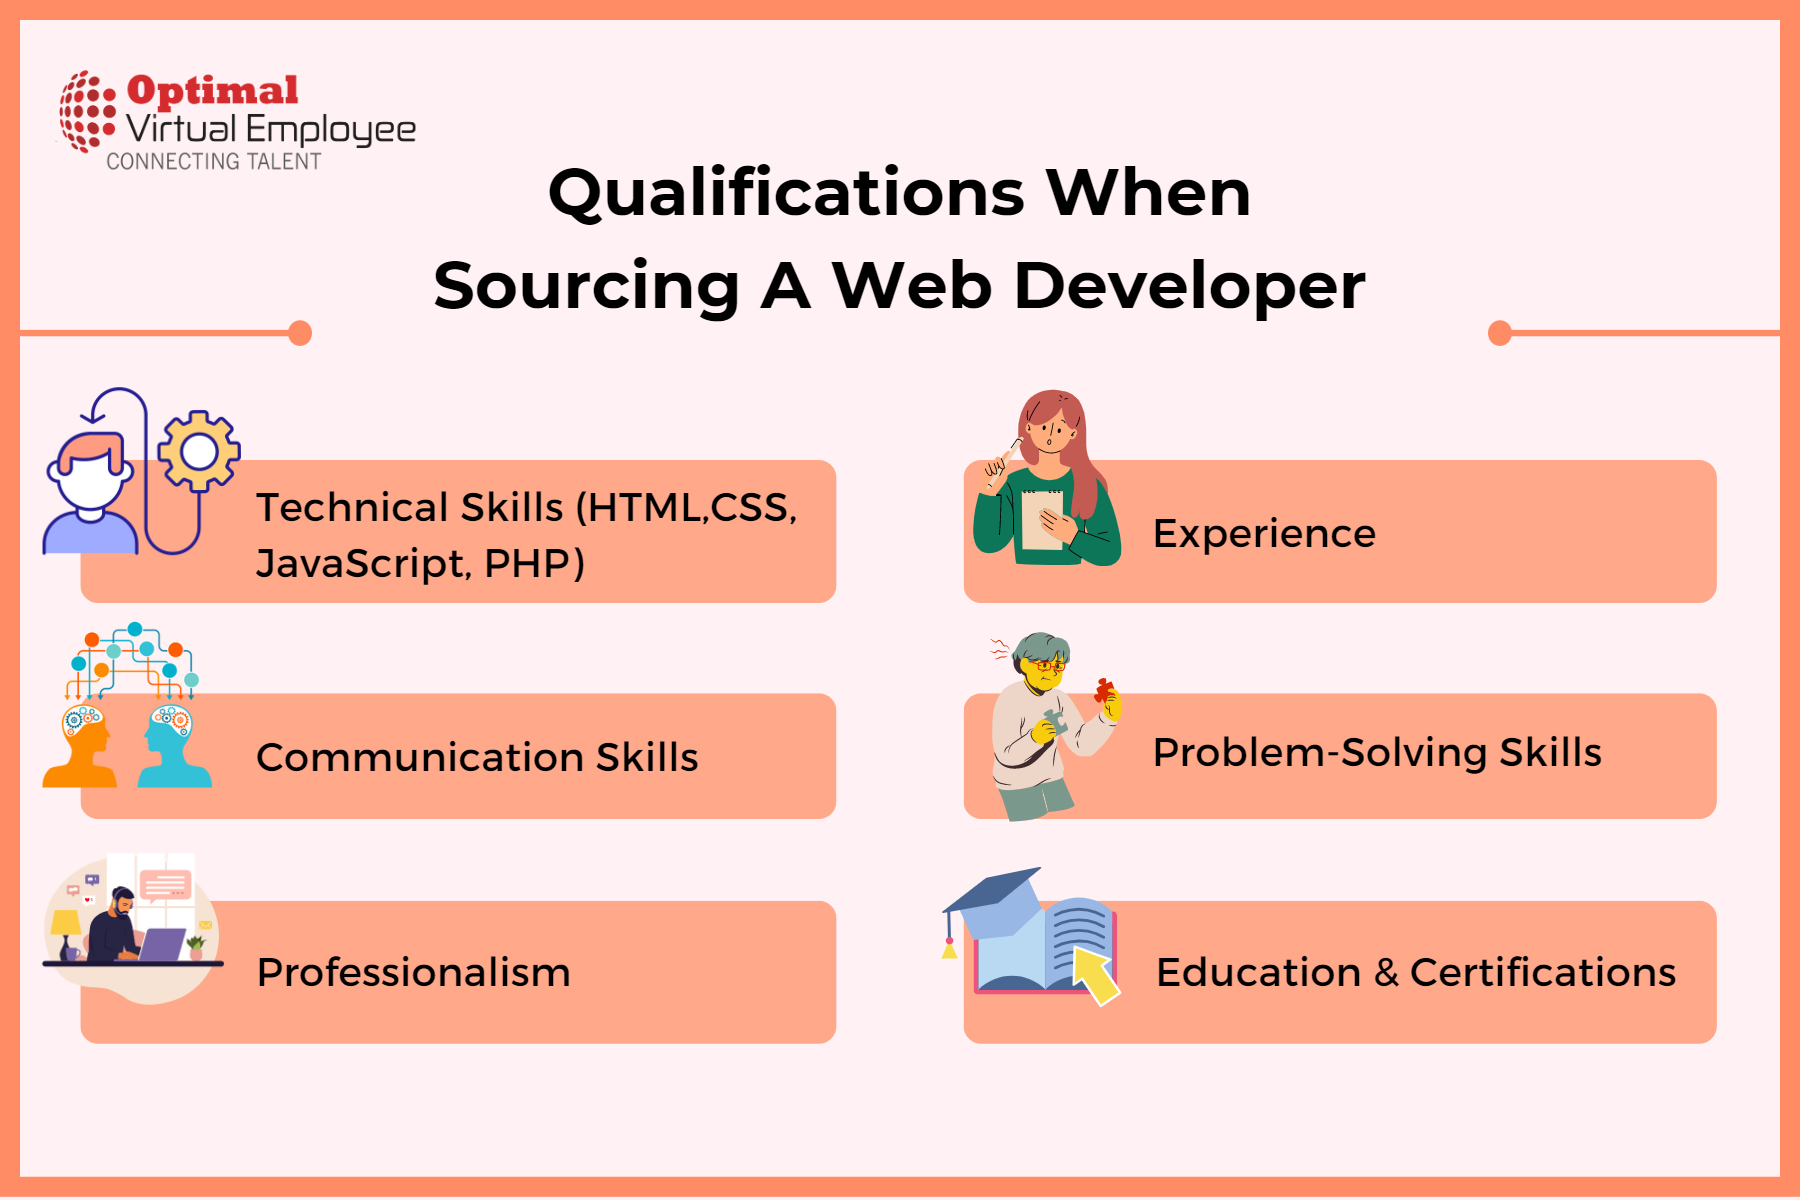 Qualifications When Sourcing A Web Developer